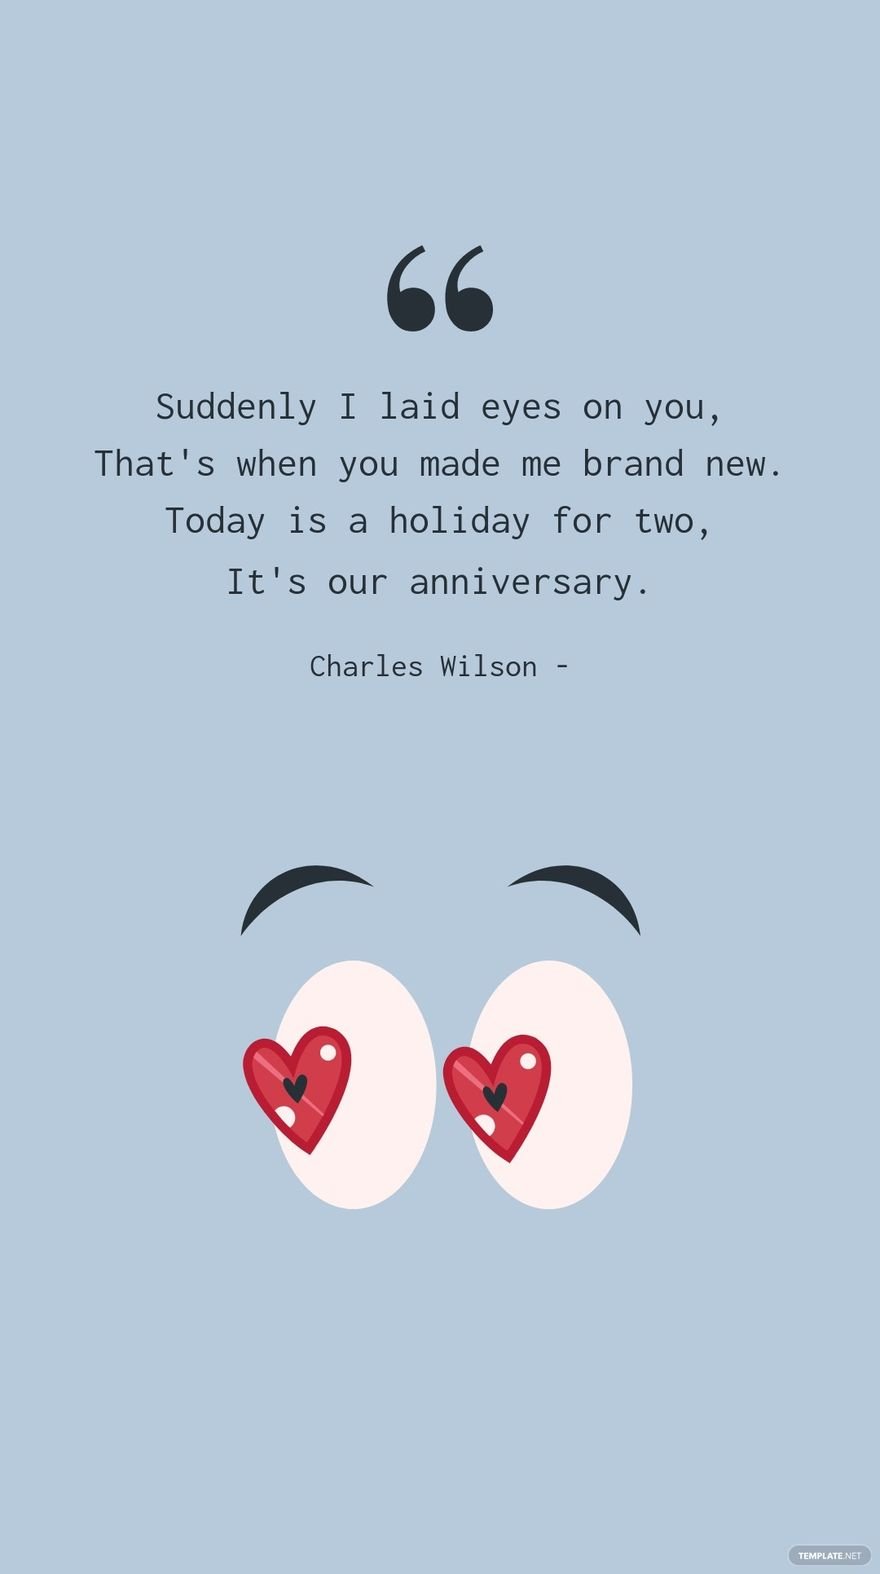 Free Charles Wilson - Suddenly I laid eyes on you, That's when you made me brand new. Today is a holiday for two, It's our anniversary.